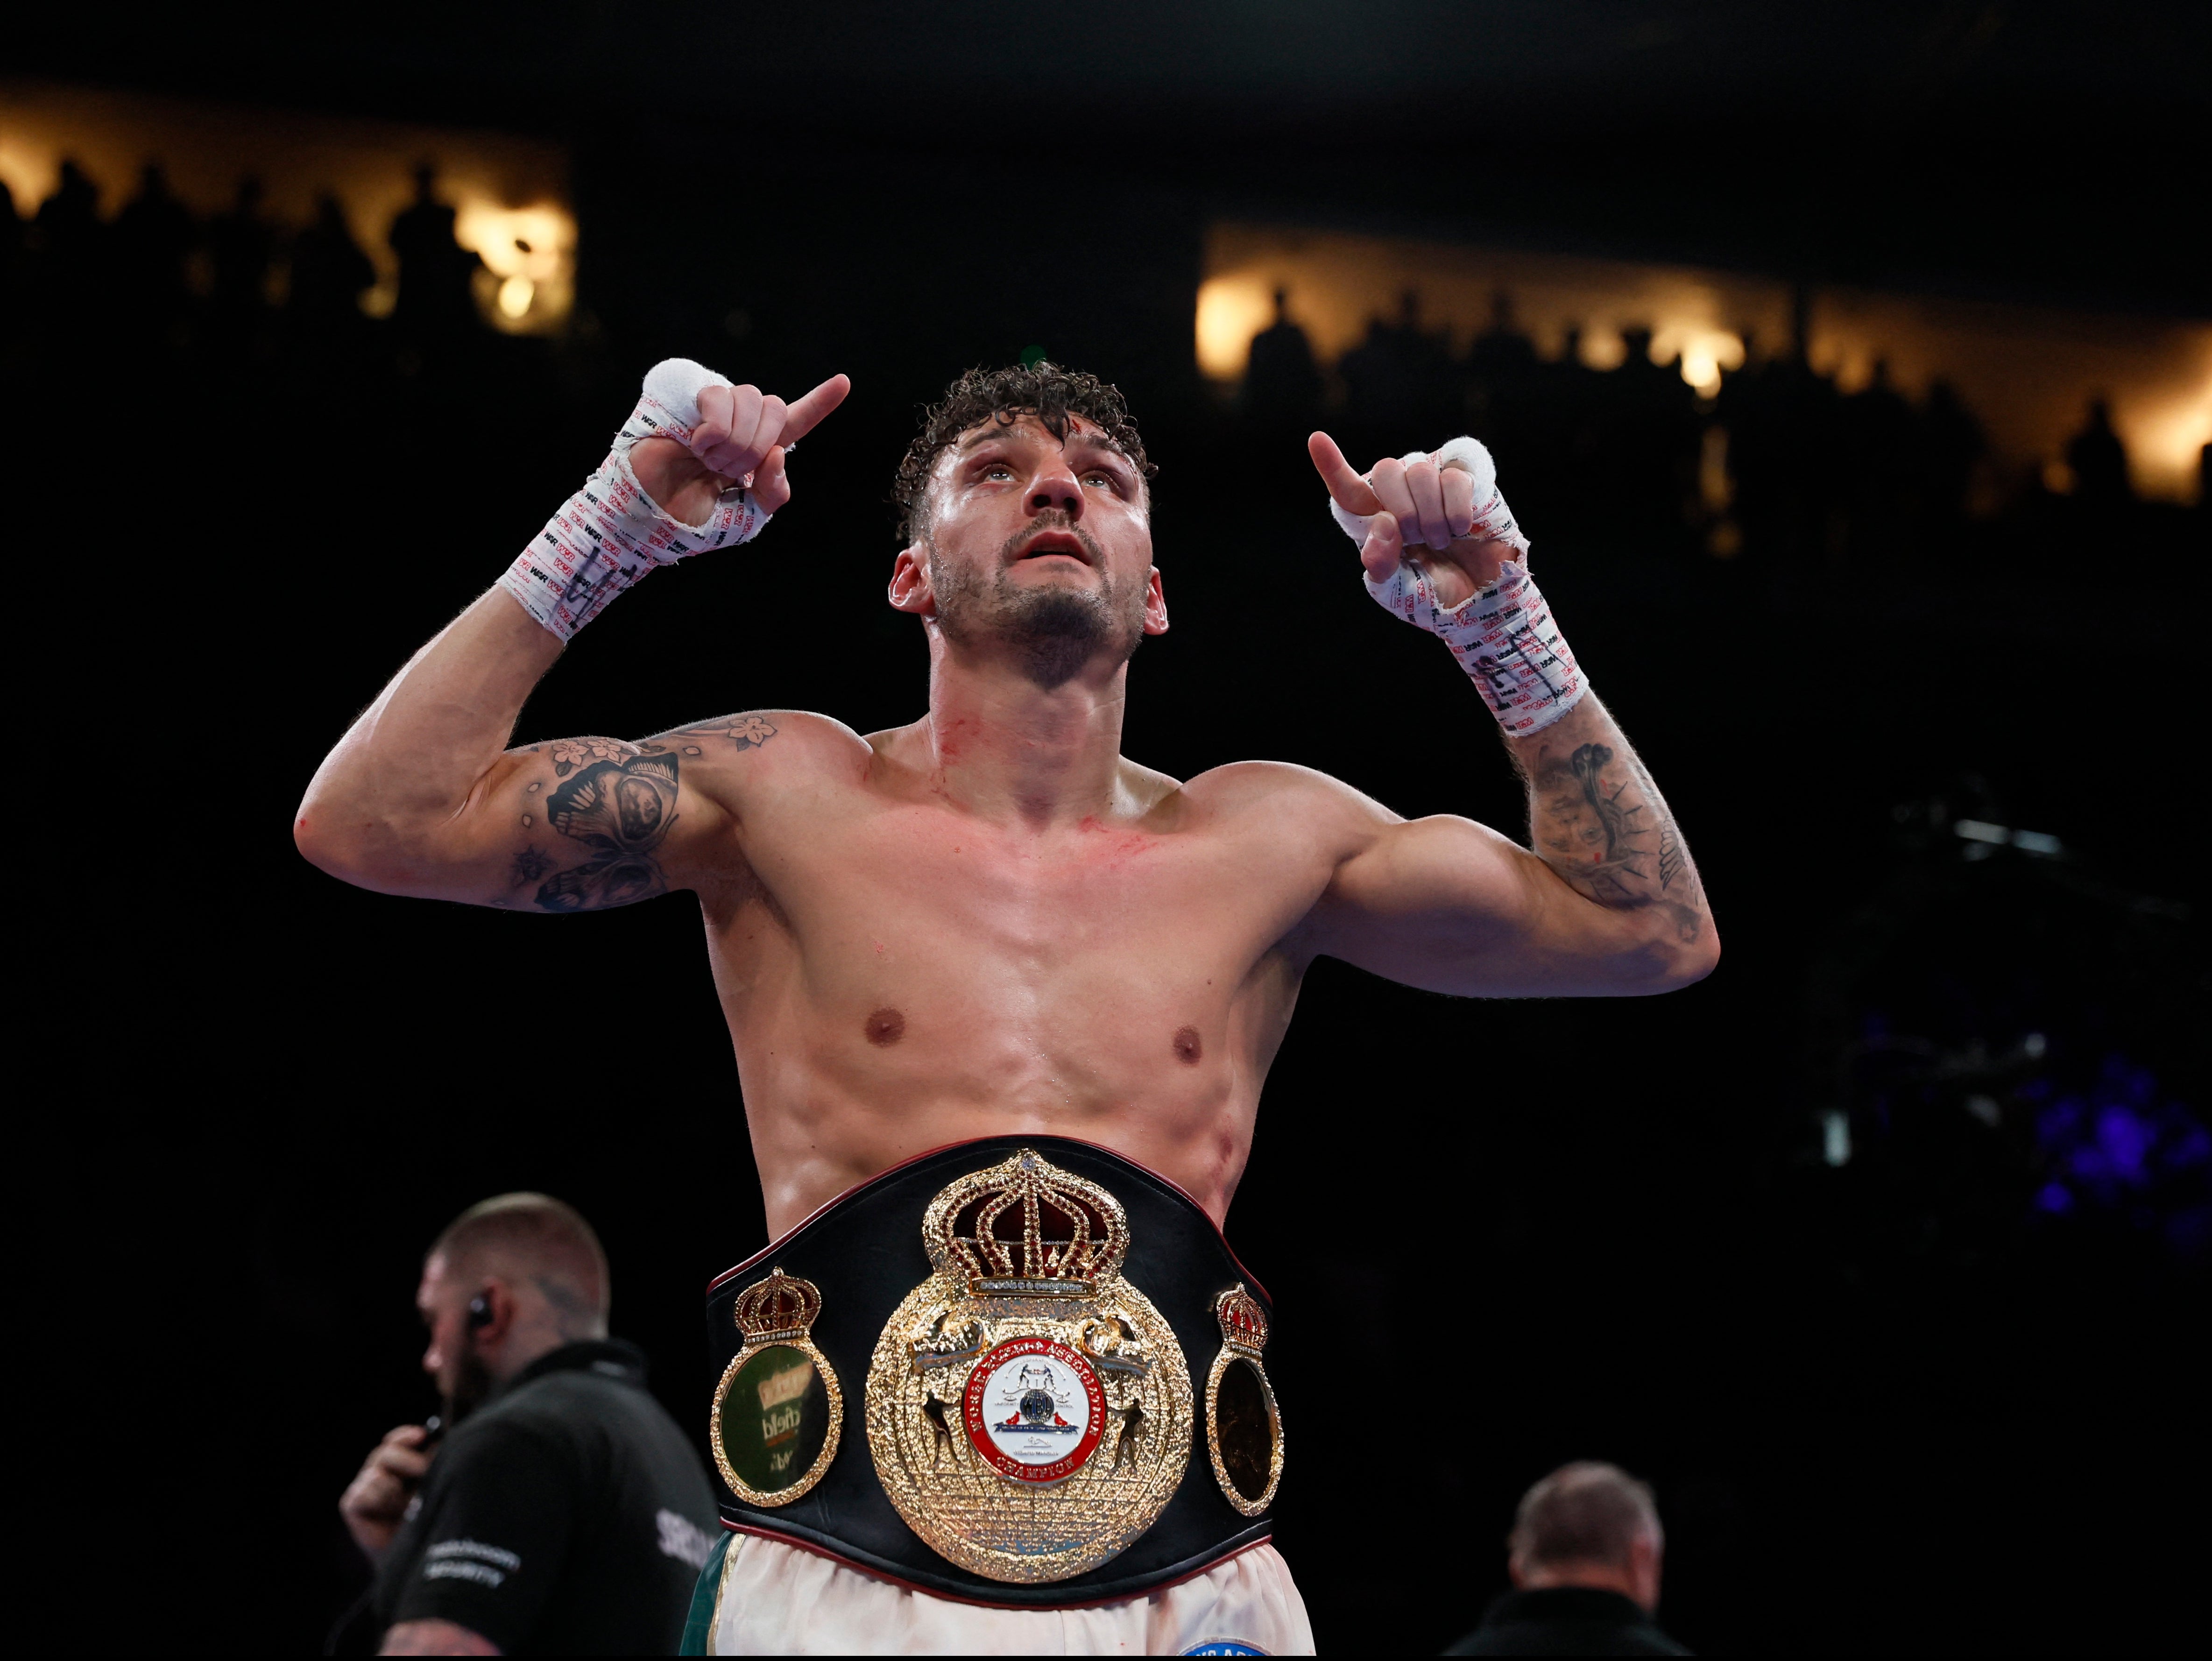 Leigh Wood retained the WBA featherweight title with a vicious knockout of Michael Conlan